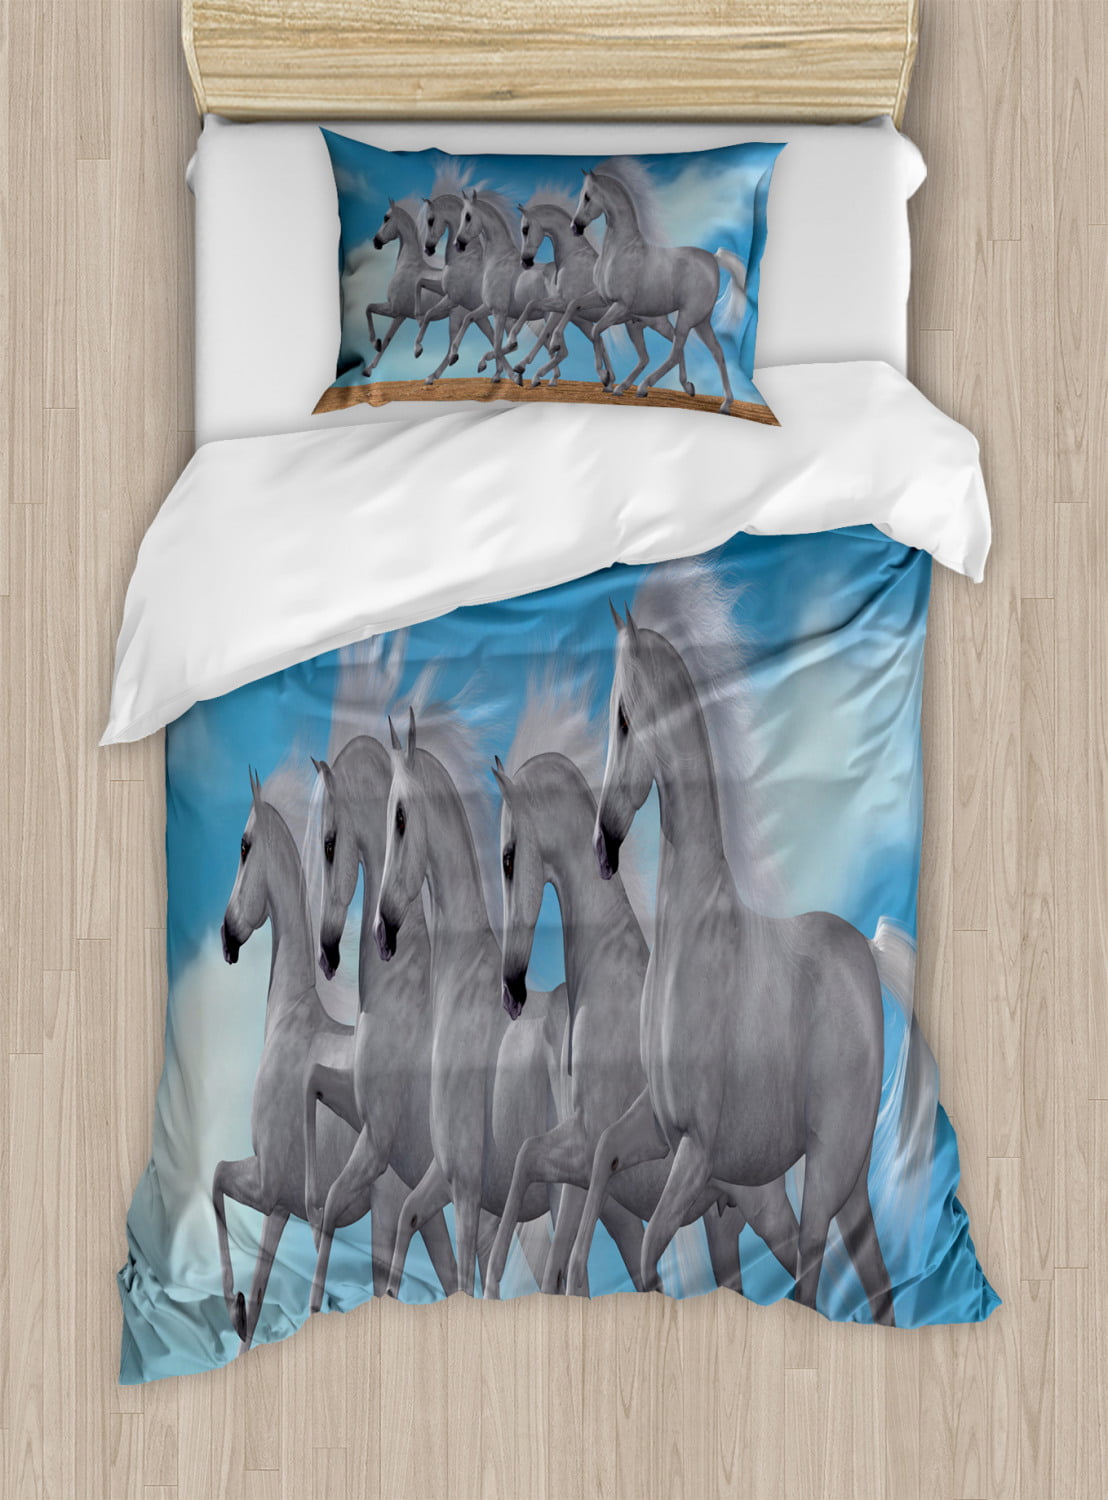 HORSES PINK PONY SILHOUETTE OUTLINE GALLOPING BLUE GREY RED BEDDING OR CURTAINS 